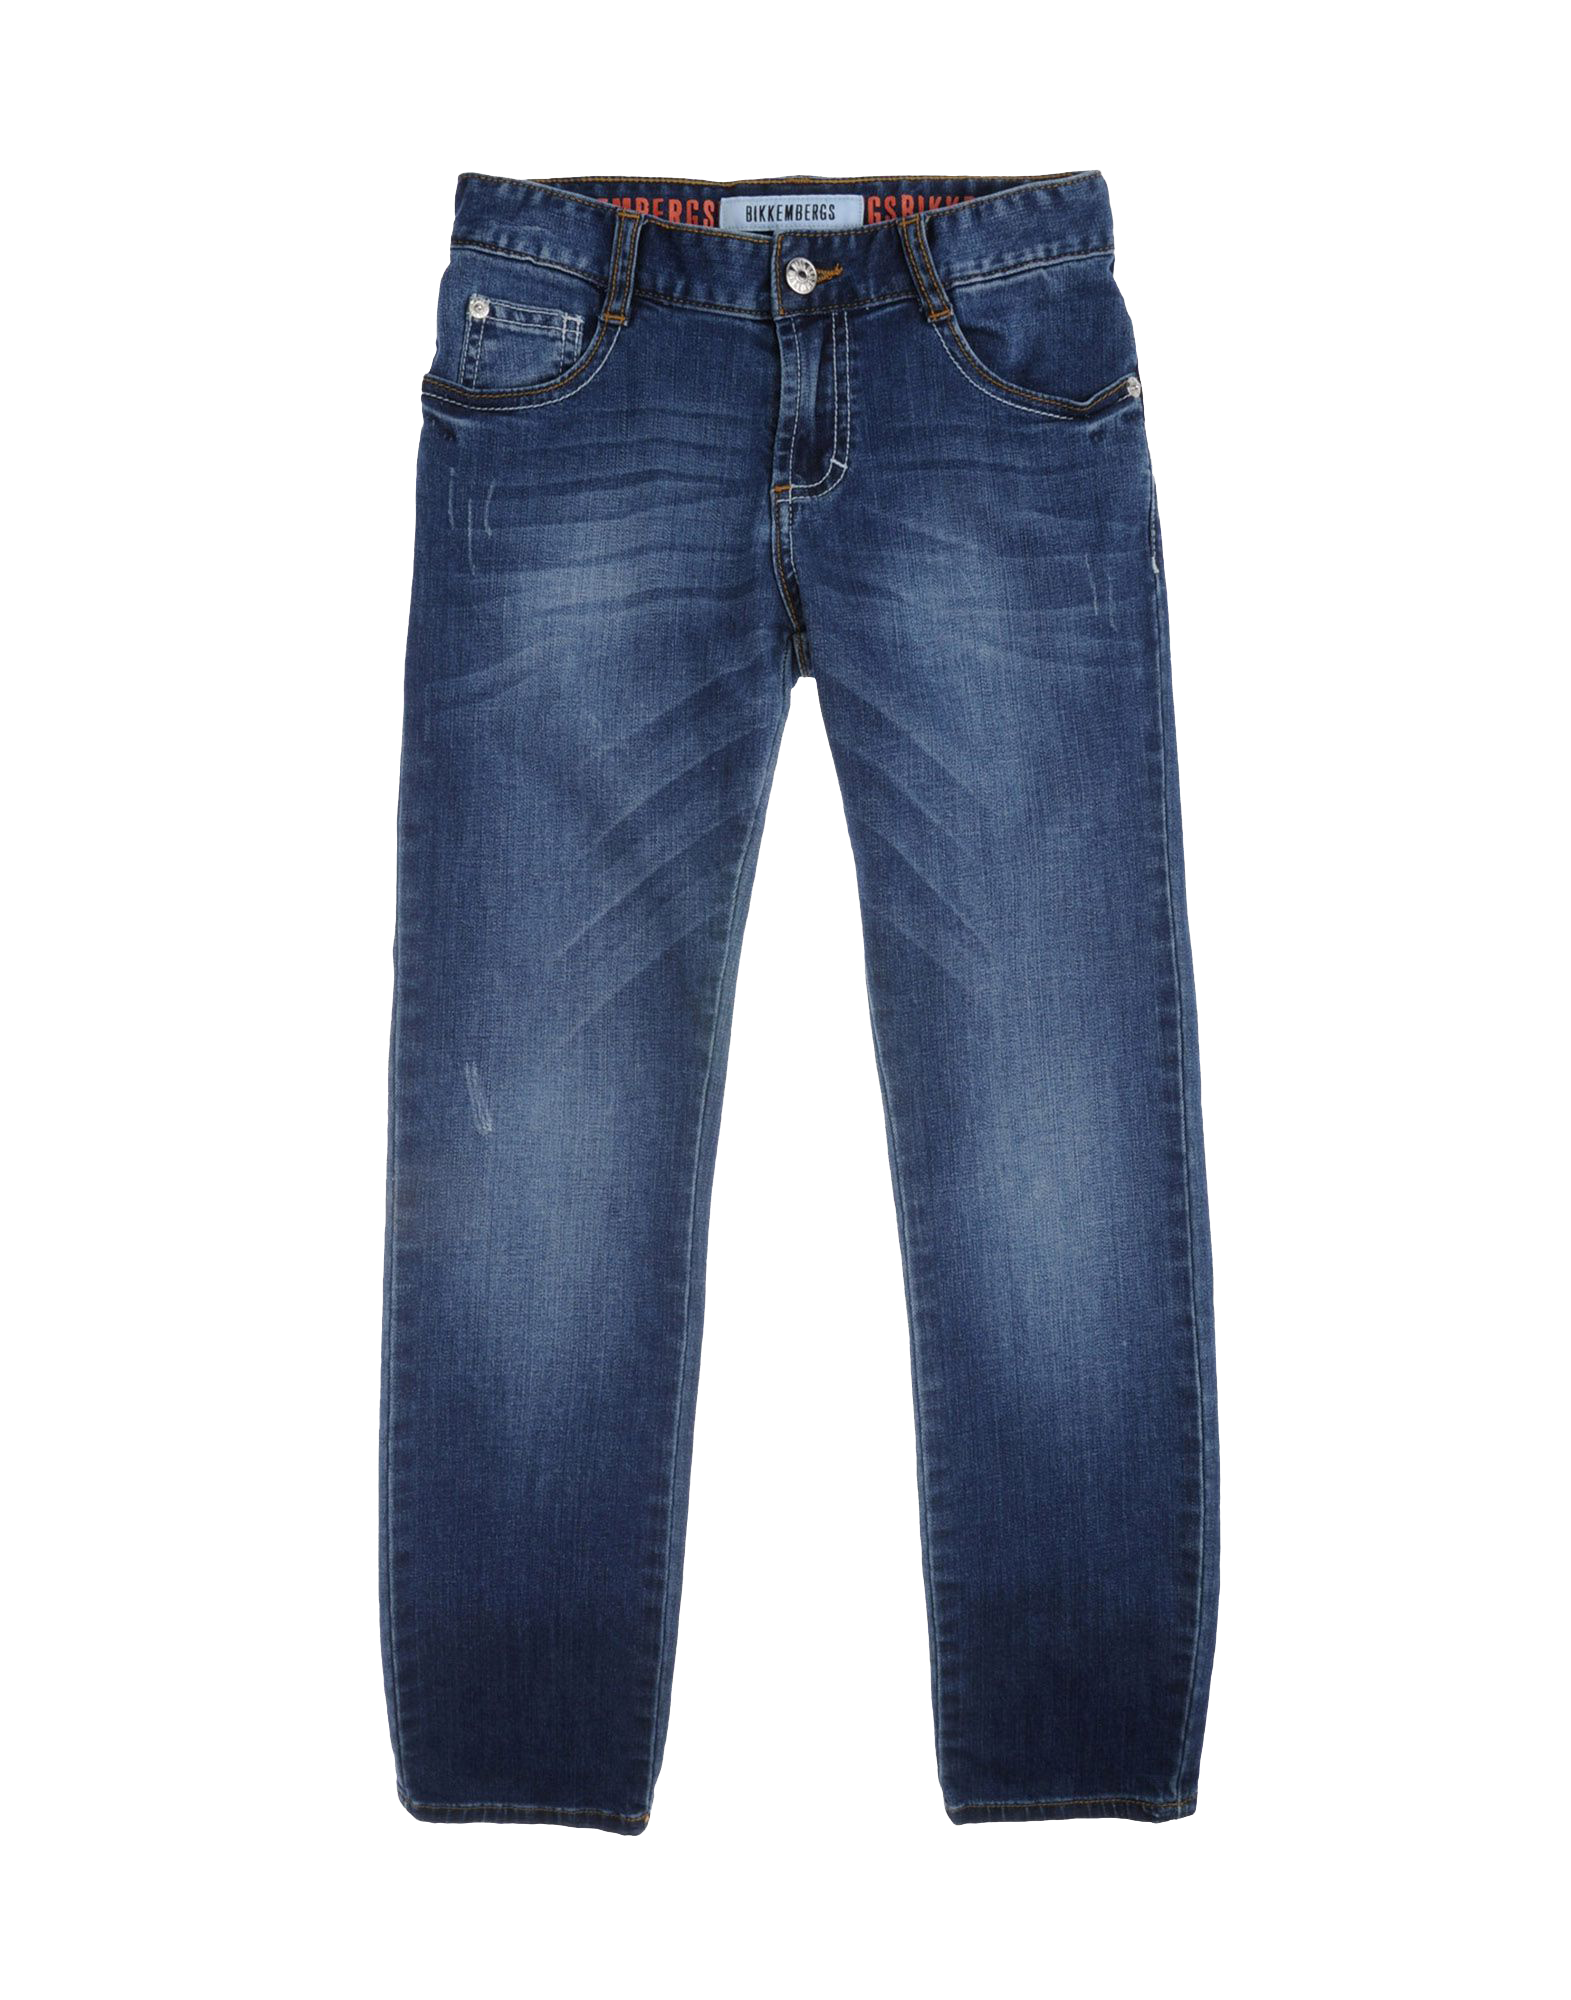 Jeans Picture PNG Image